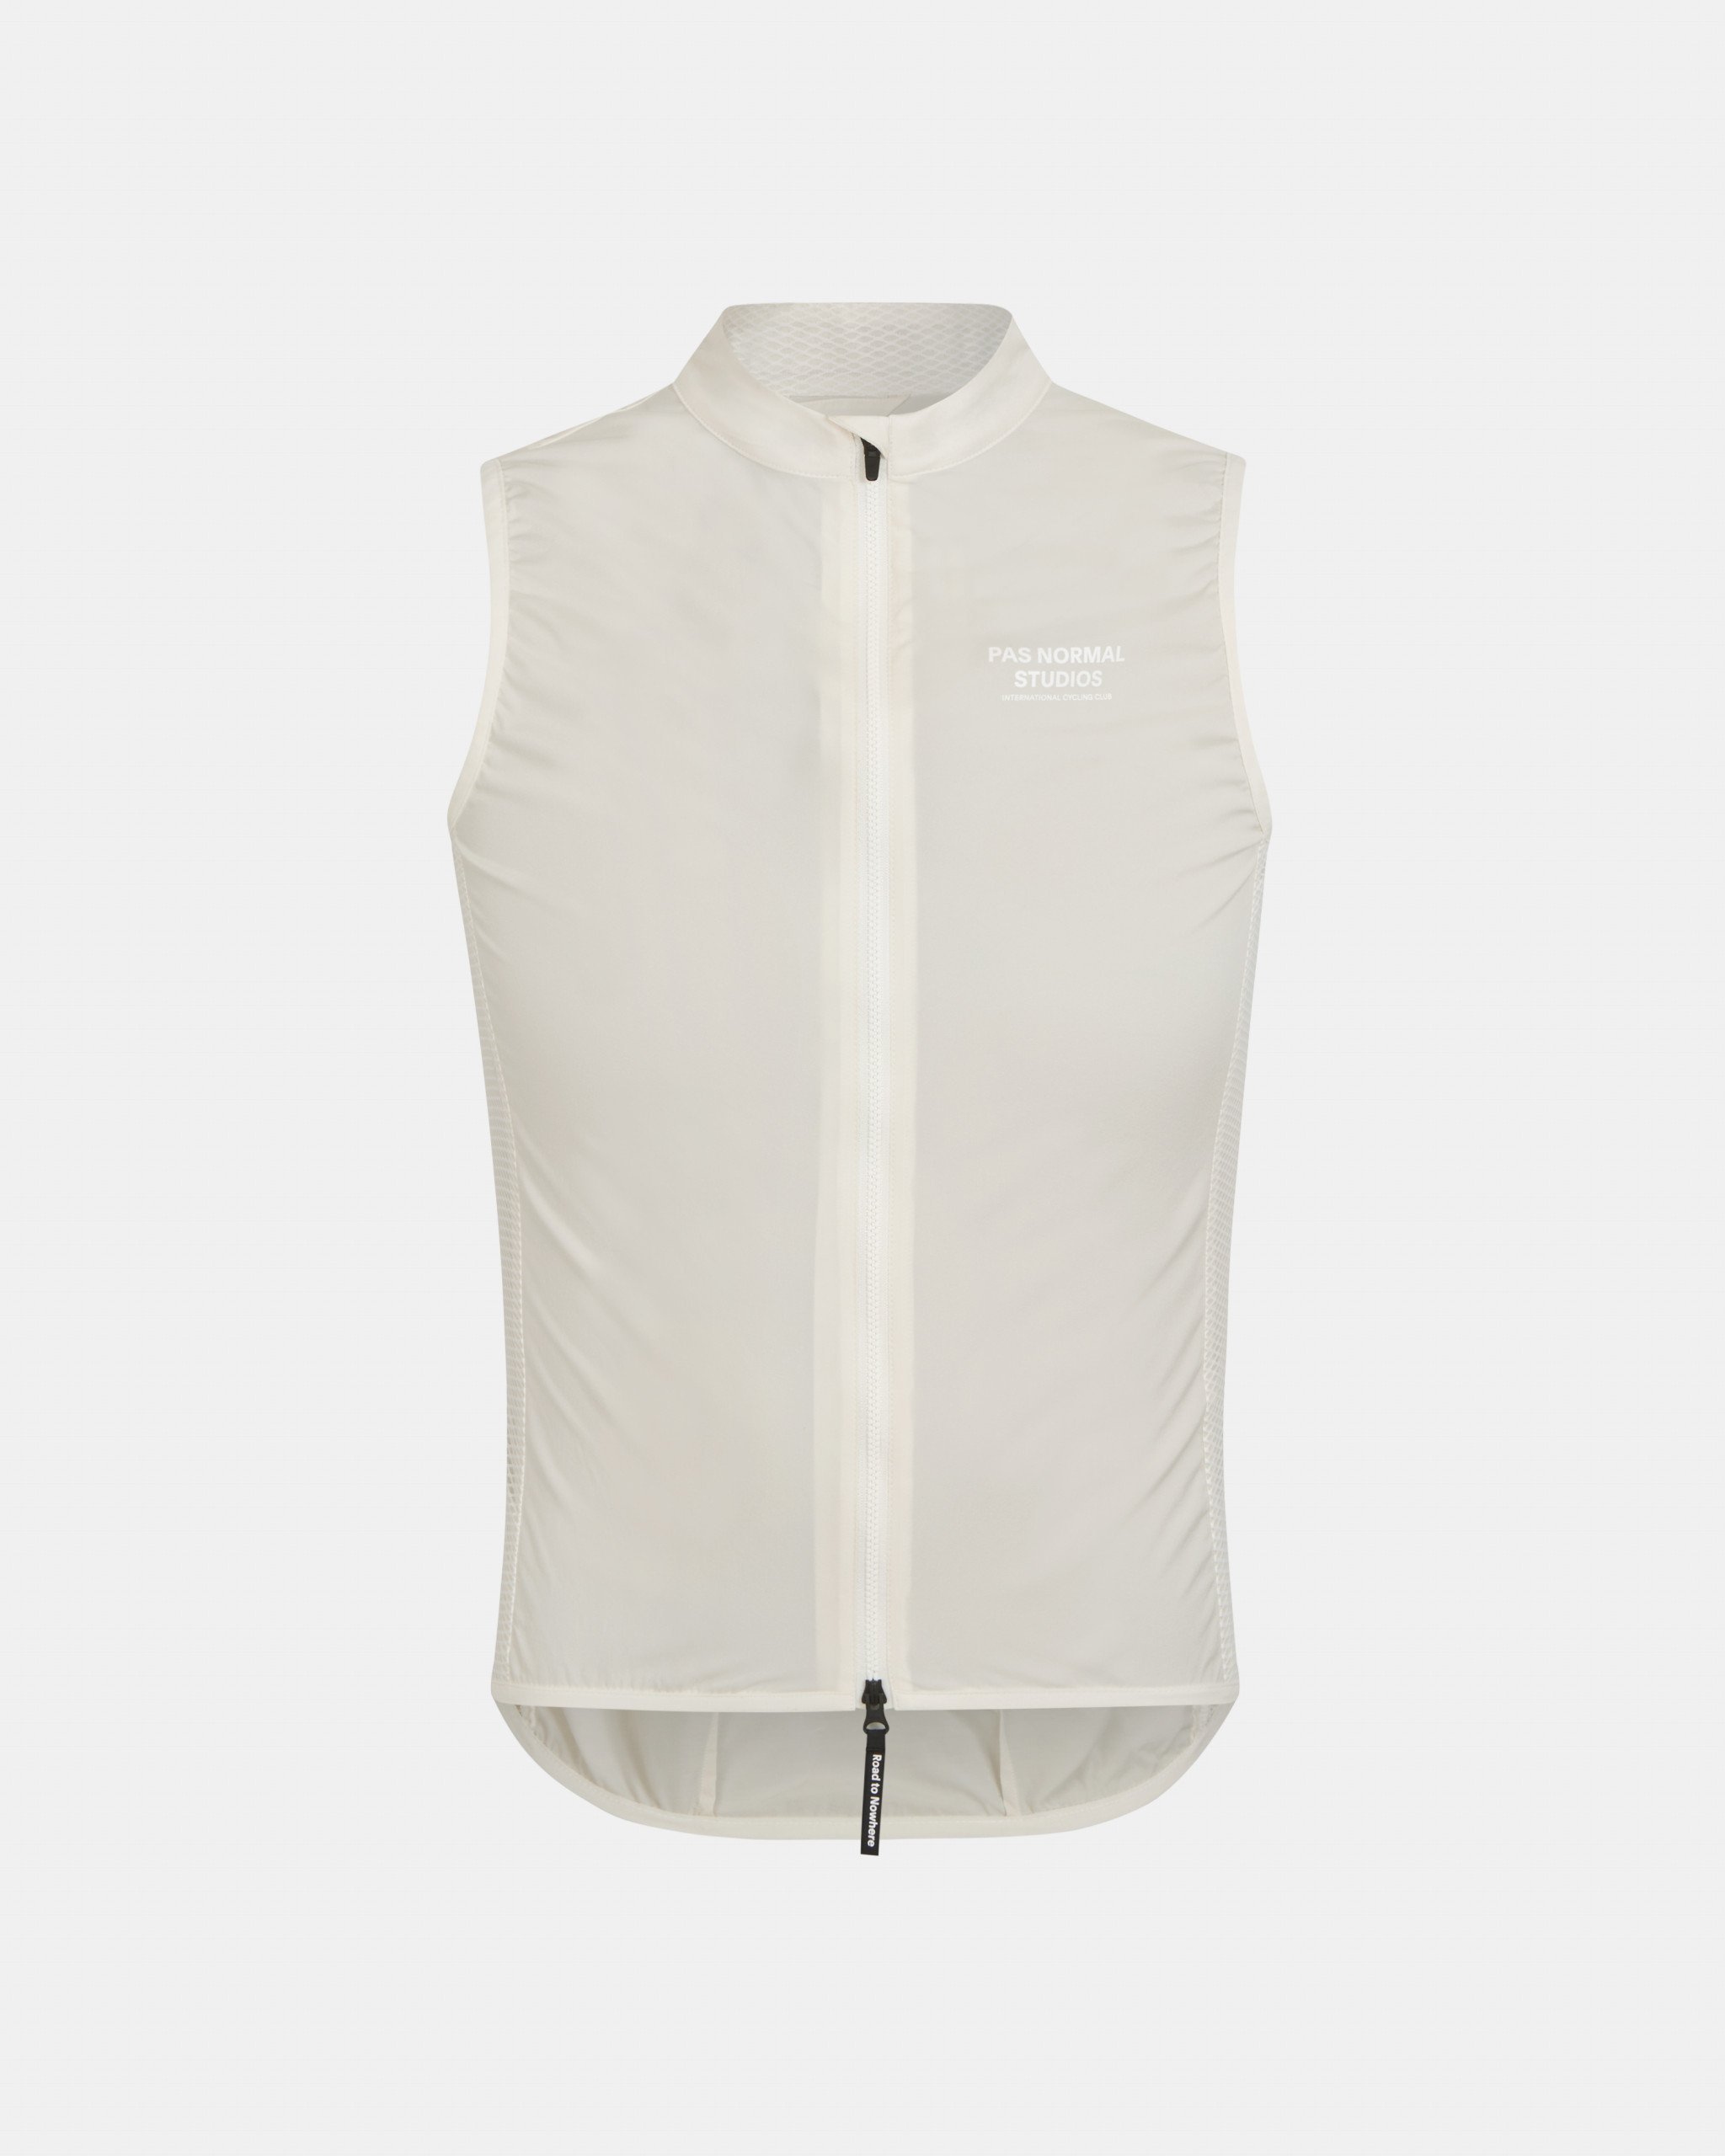 PAS NORMAL STUDIOS Stow Away Gilet Off White Men — Cycle Store Zurich